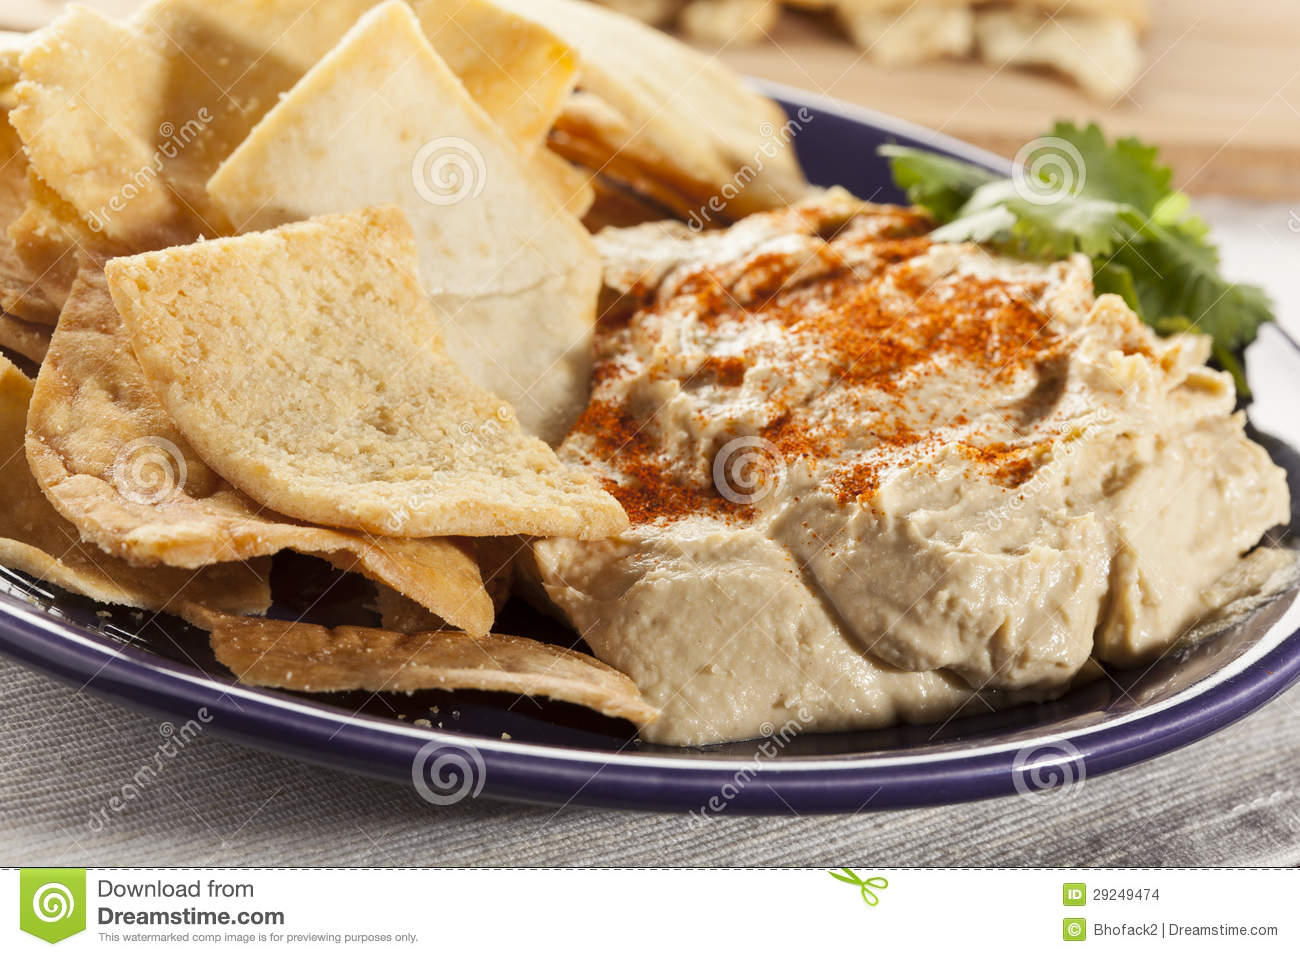 Homemade Crunchy Pita Chips With Hummus Stock Images   Image  29249474